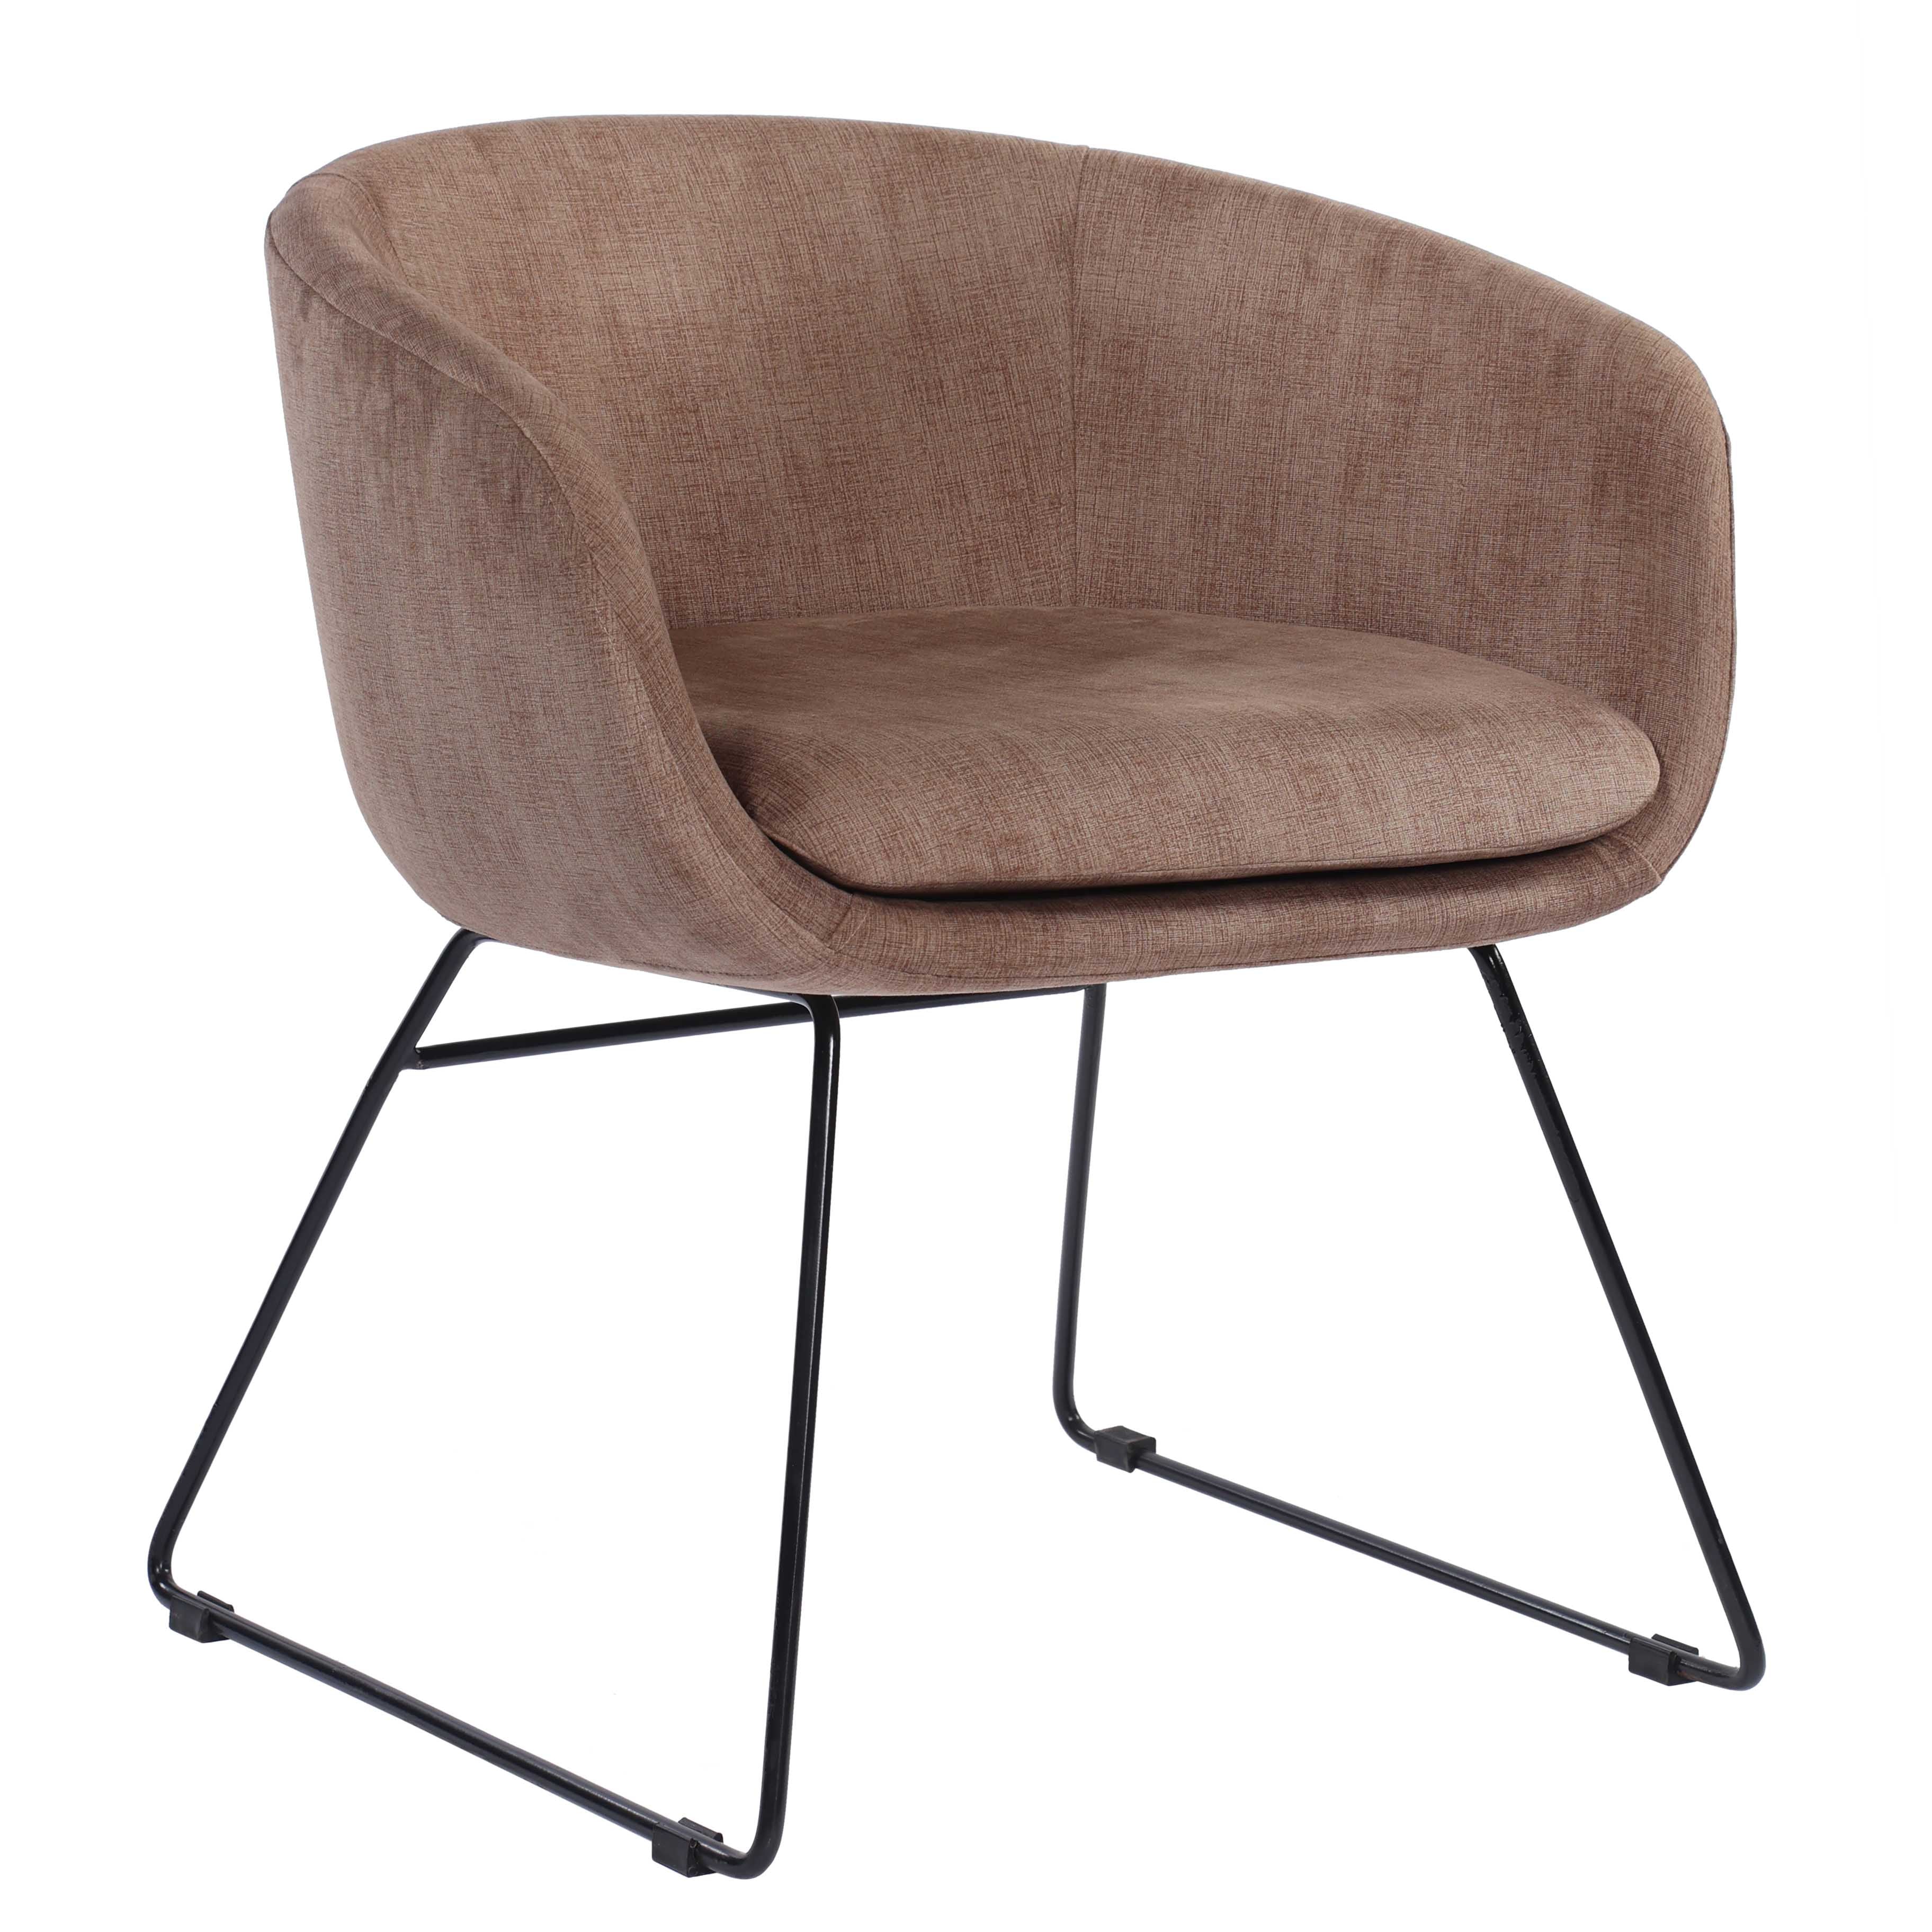 Emilia Fabric Lounge Armchair With Stainless Steel Legs - Brown